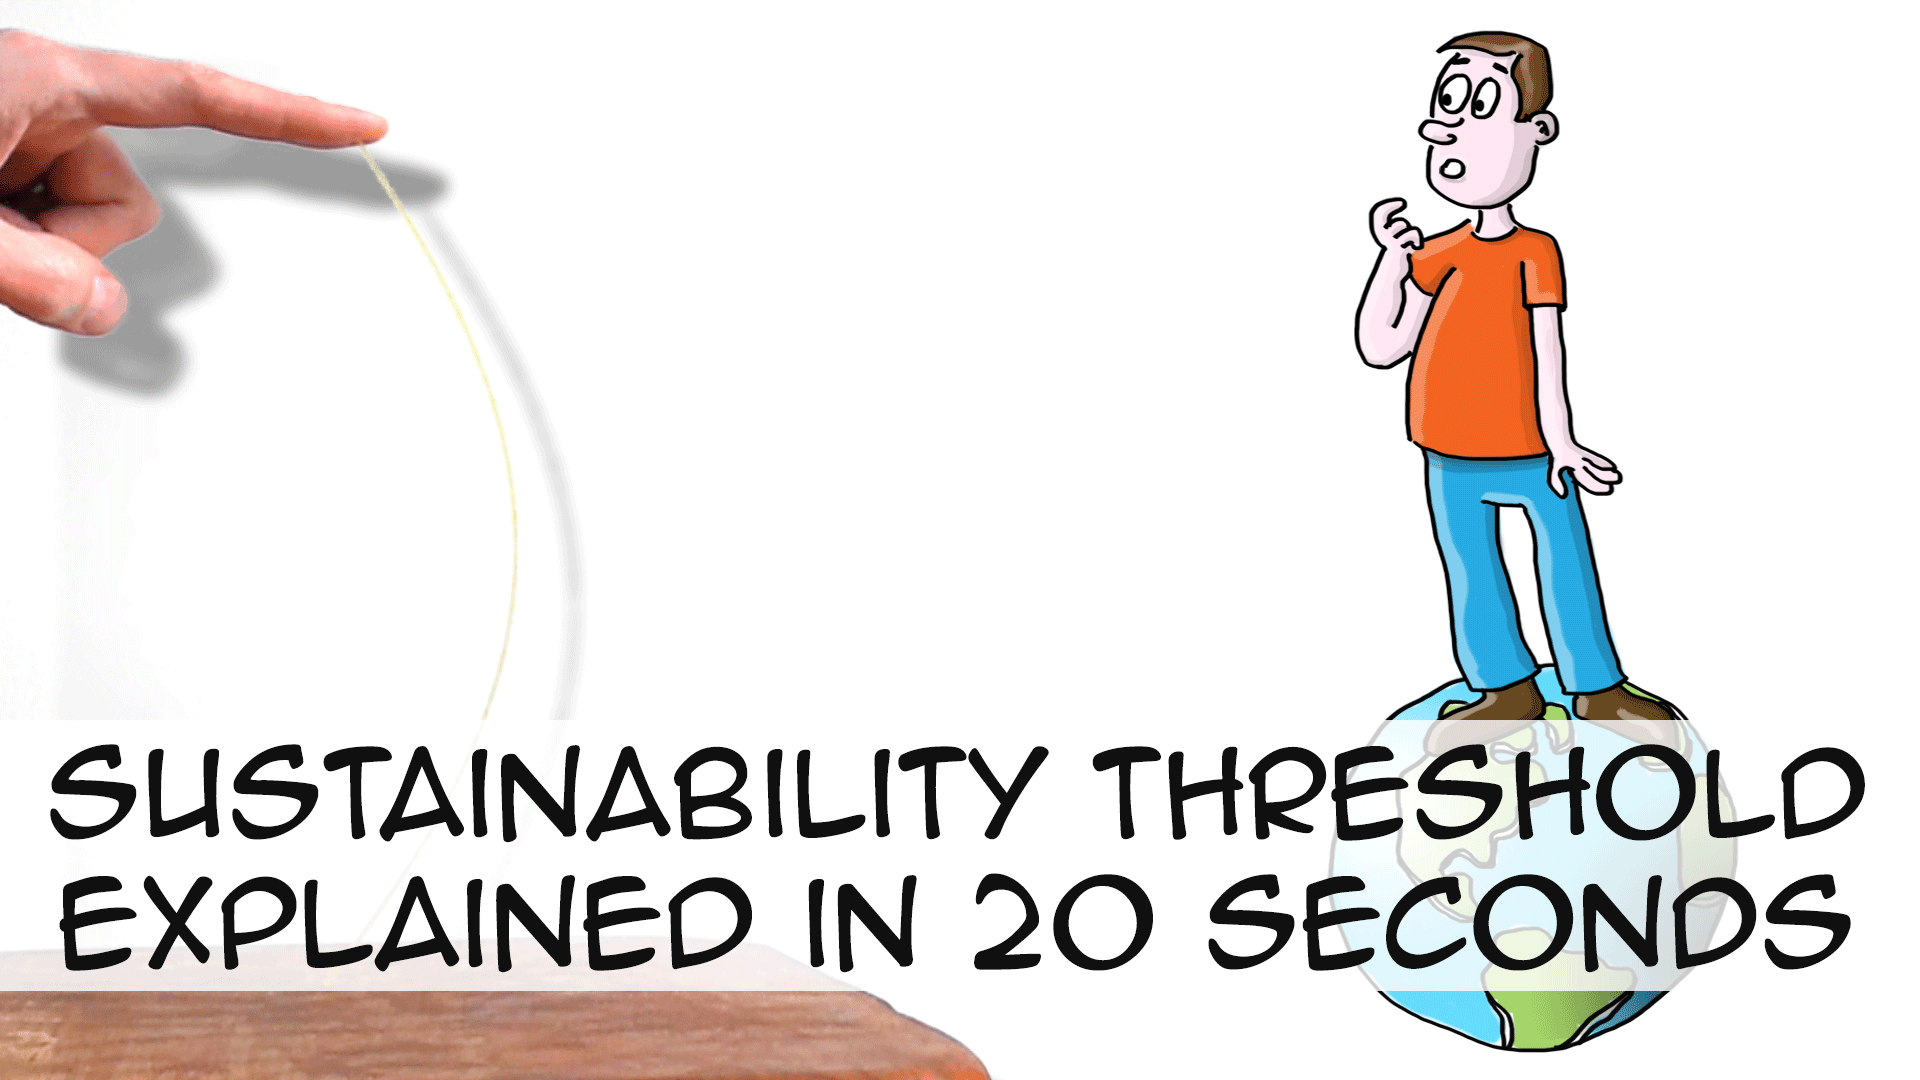 Sustainability: the threshold explained in 20 seconds (spaghetti analogy)